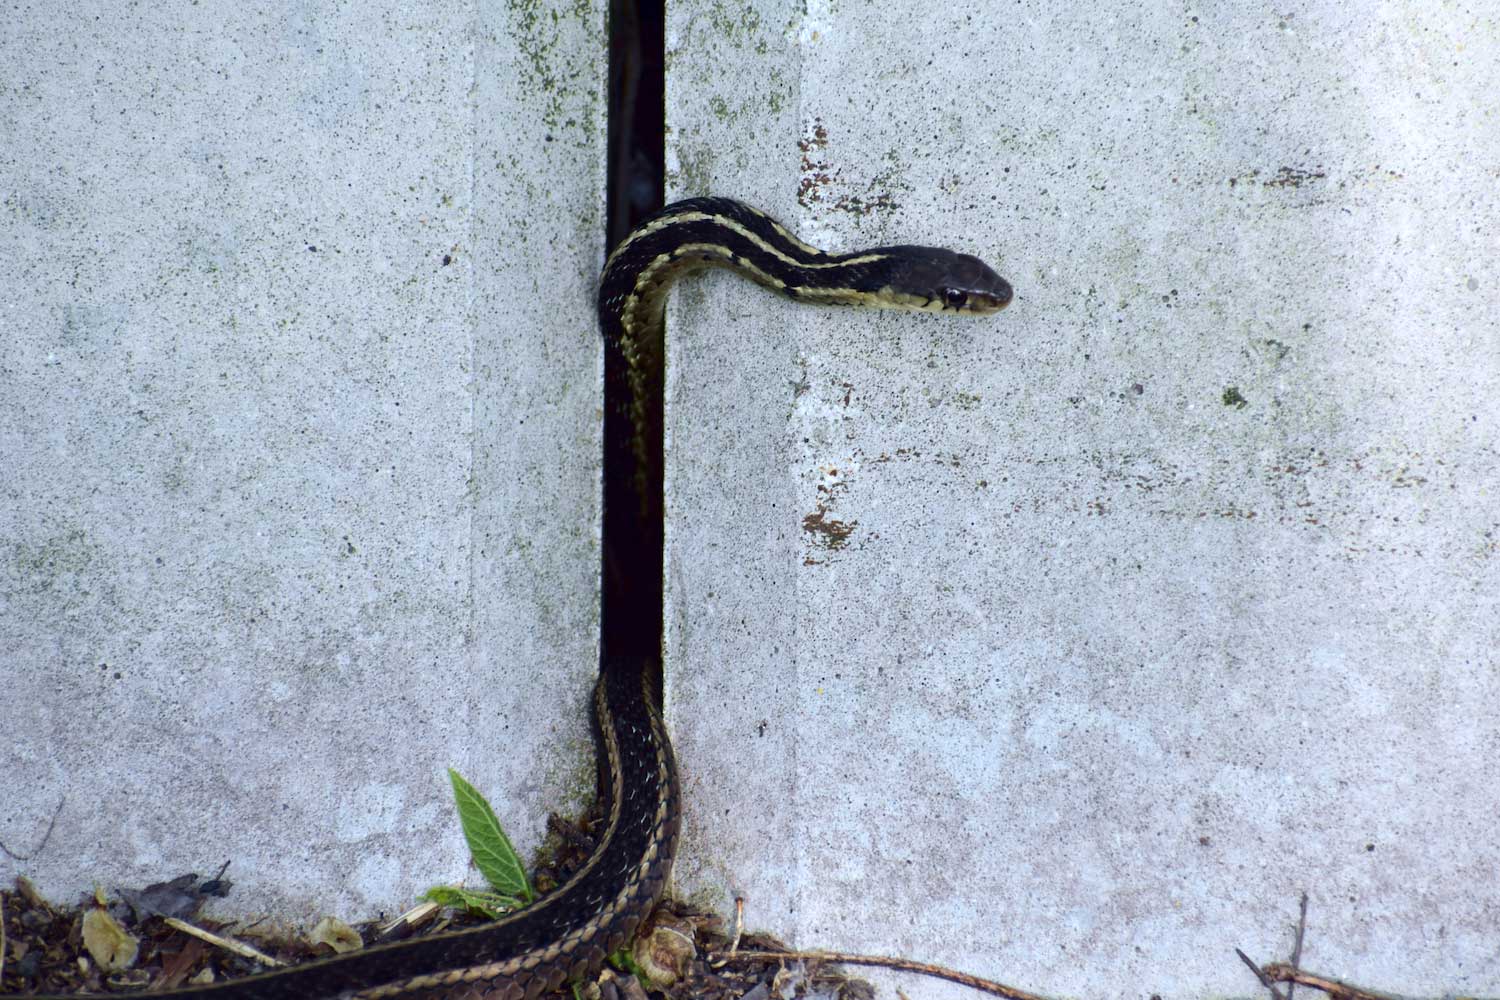 A garter snake coming out of the crack between sidewalk squares.